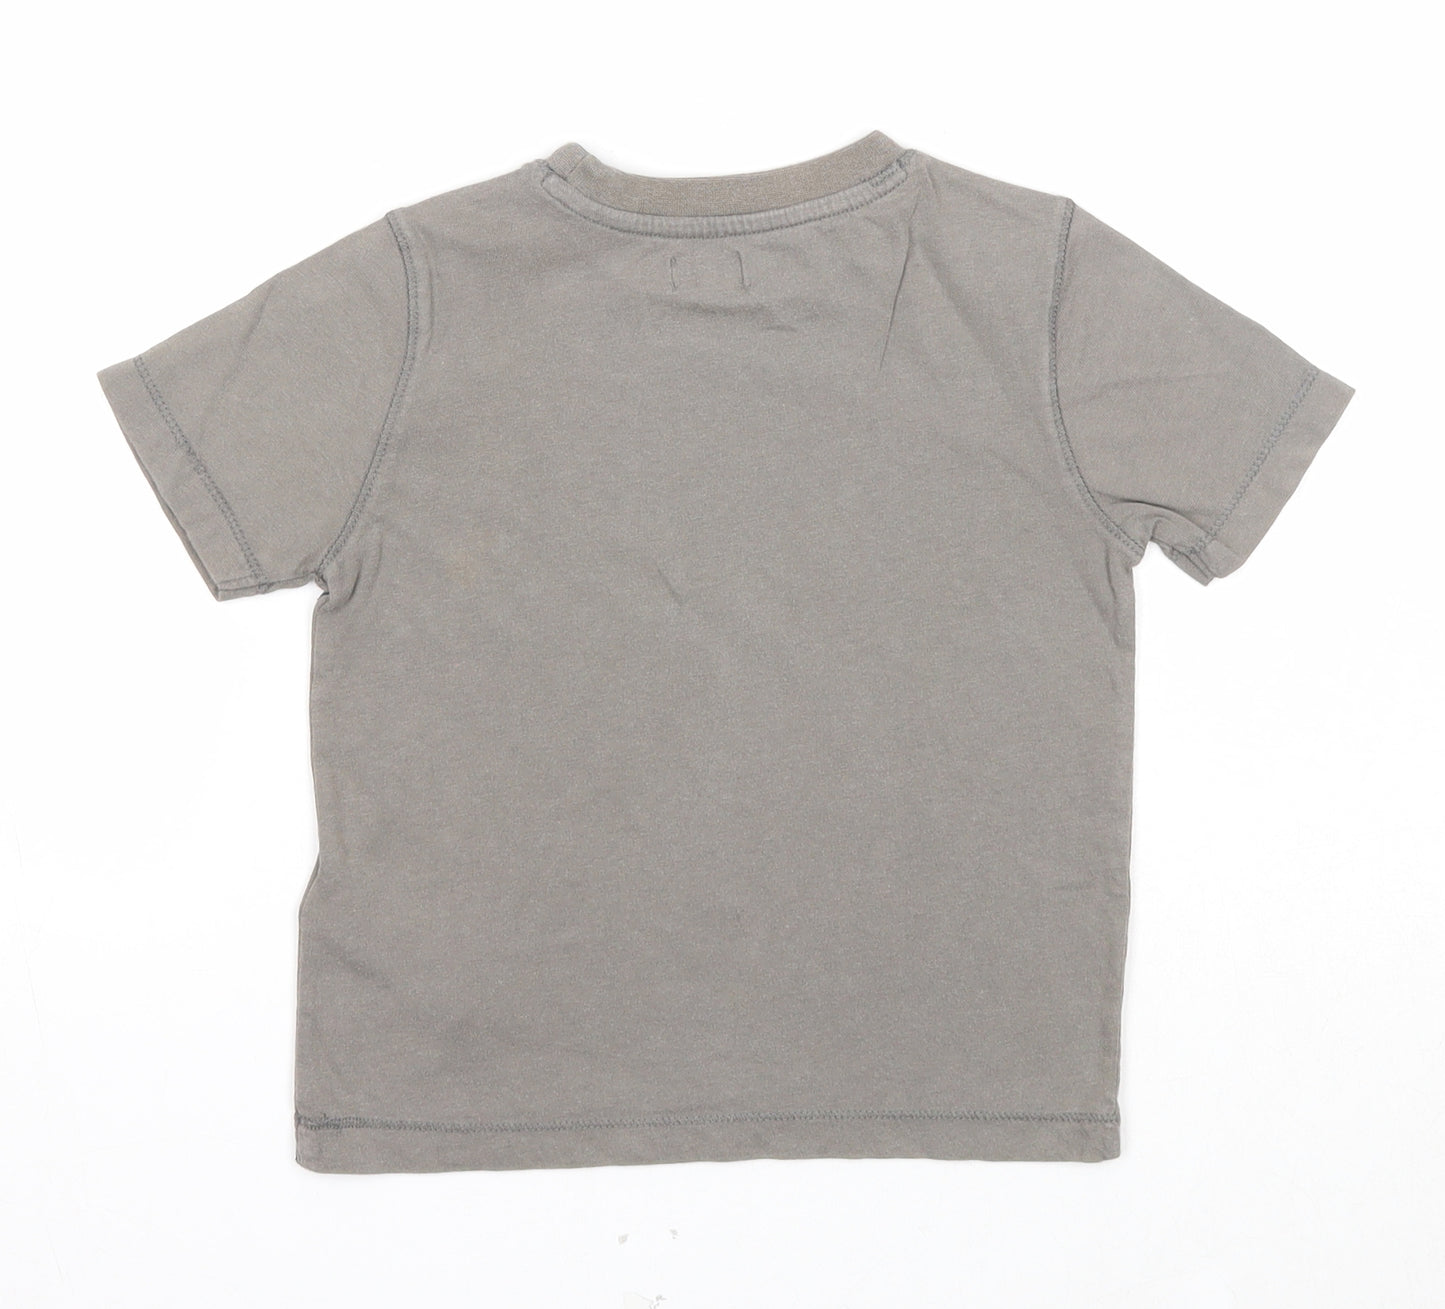 F&F Boys Grey Cotton Basic T-Shirt Size 2-3 Years Round Neck Pullover